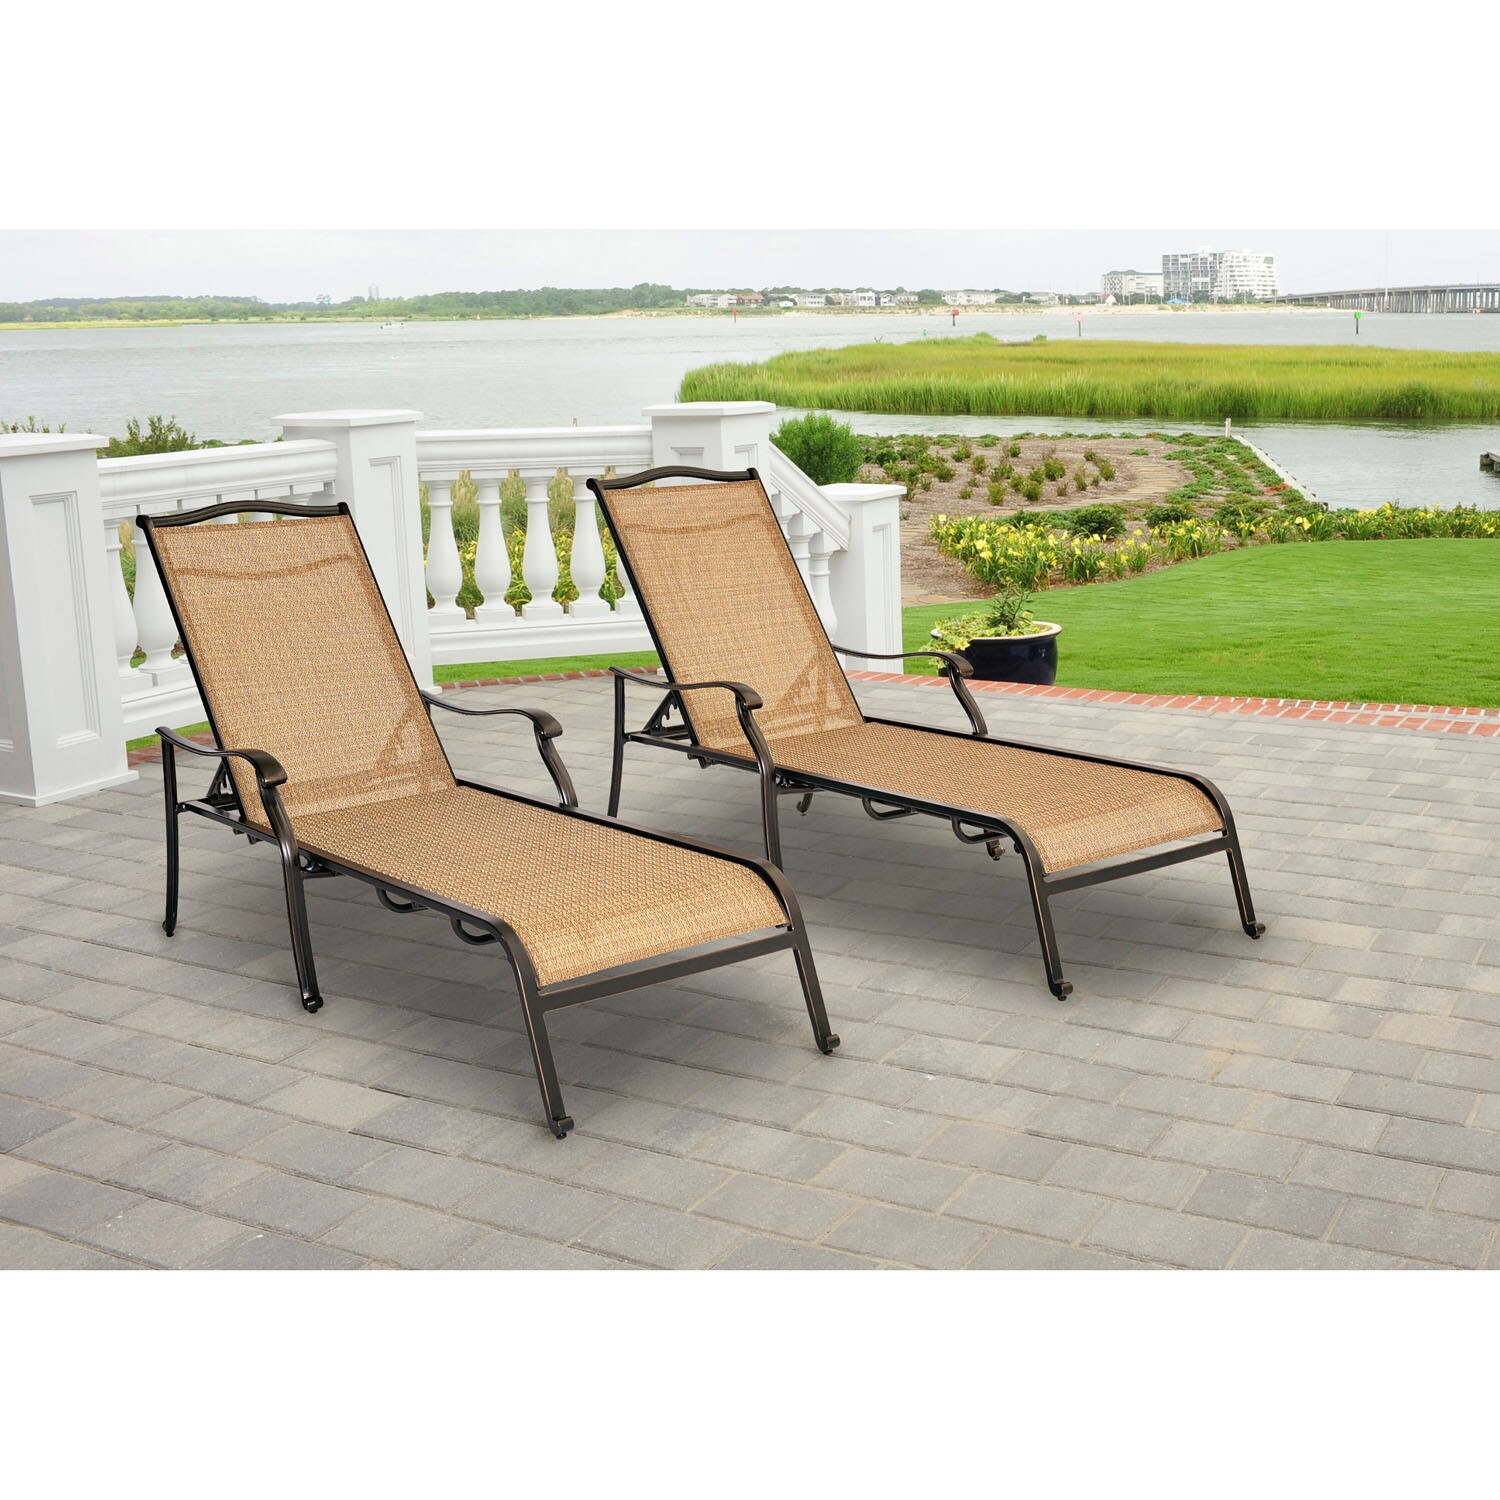 Hanover Monaco Tan Outdoor Chaise Chairs (Set 2) - Sale - Overstock - 12067618